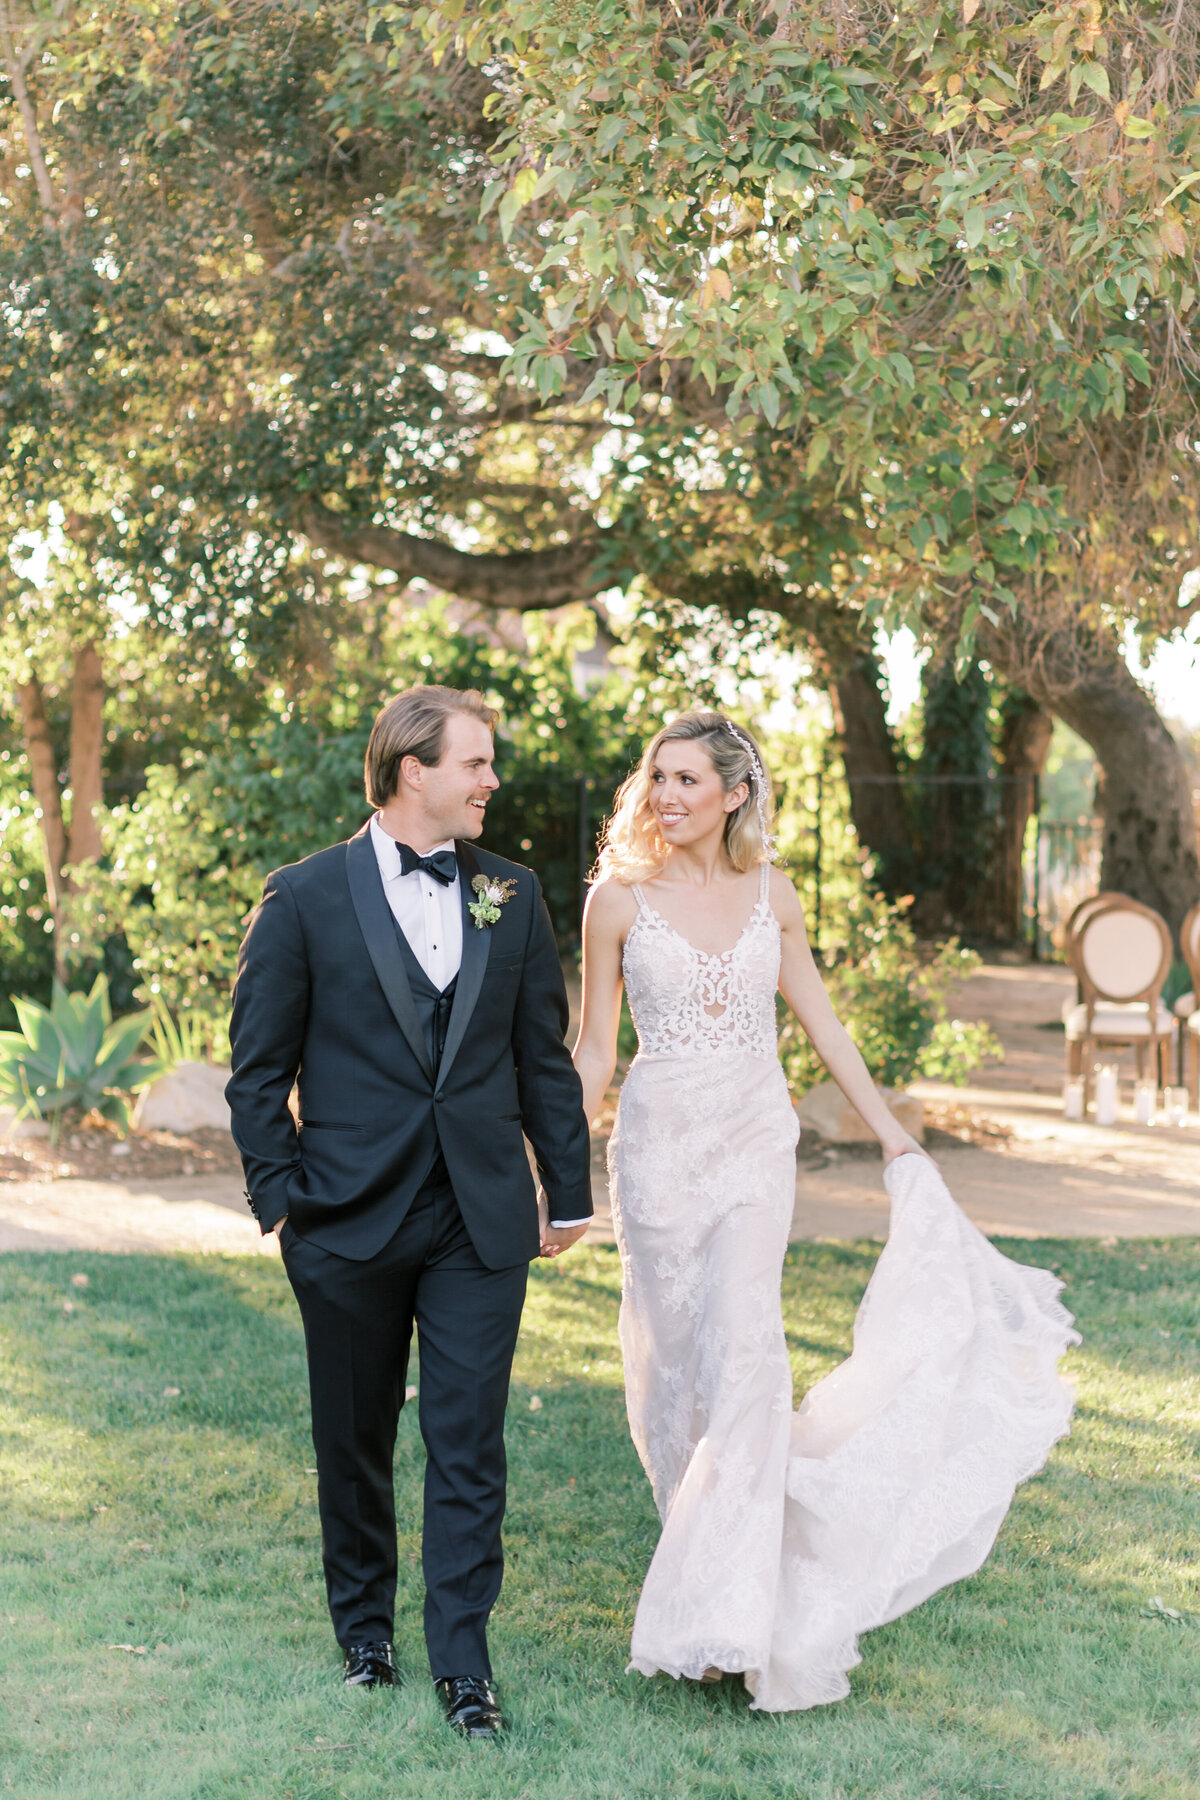 Jocelyn and Spencer Photography California Santa Barbara Wedding Engagement Luxury High End Romantic Imagery Light Airy Fineart Film Style3